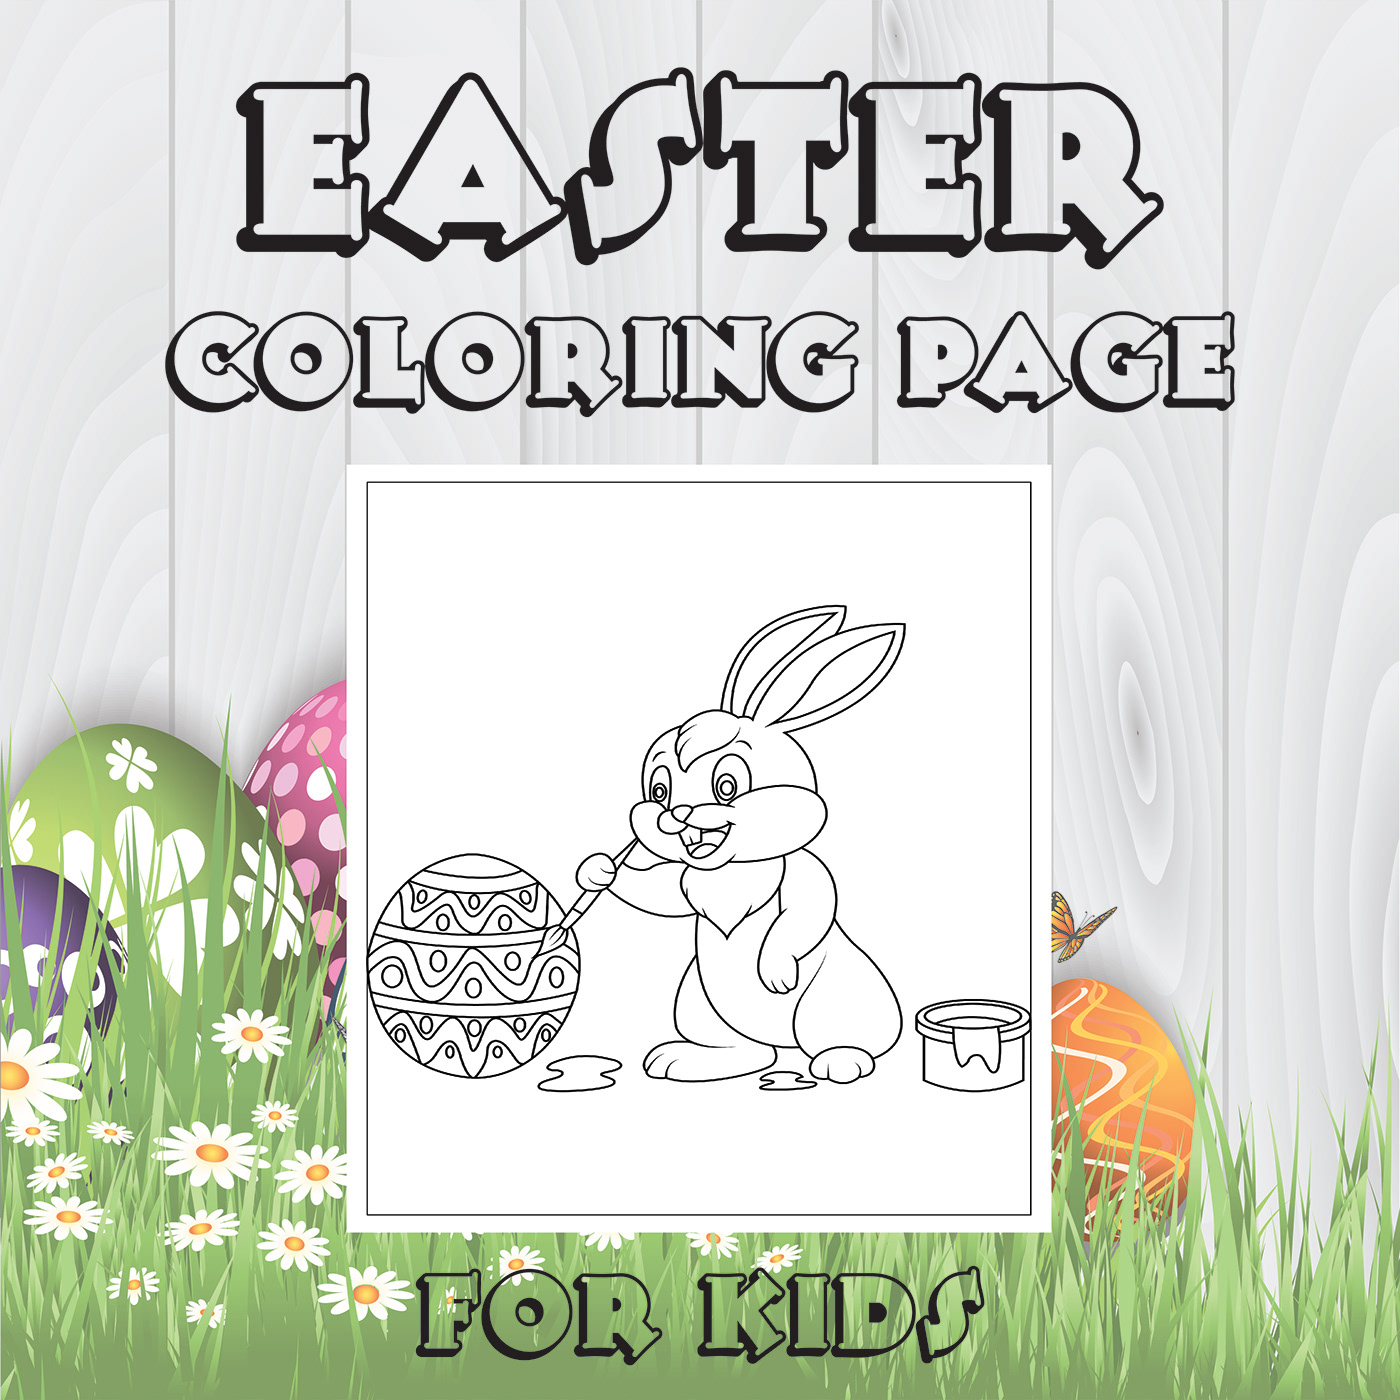 coloring coloringbook coloringpages Easter easter bunny Easter Egg bunny ILLUSTRATION  easterbook eastercoloringbook